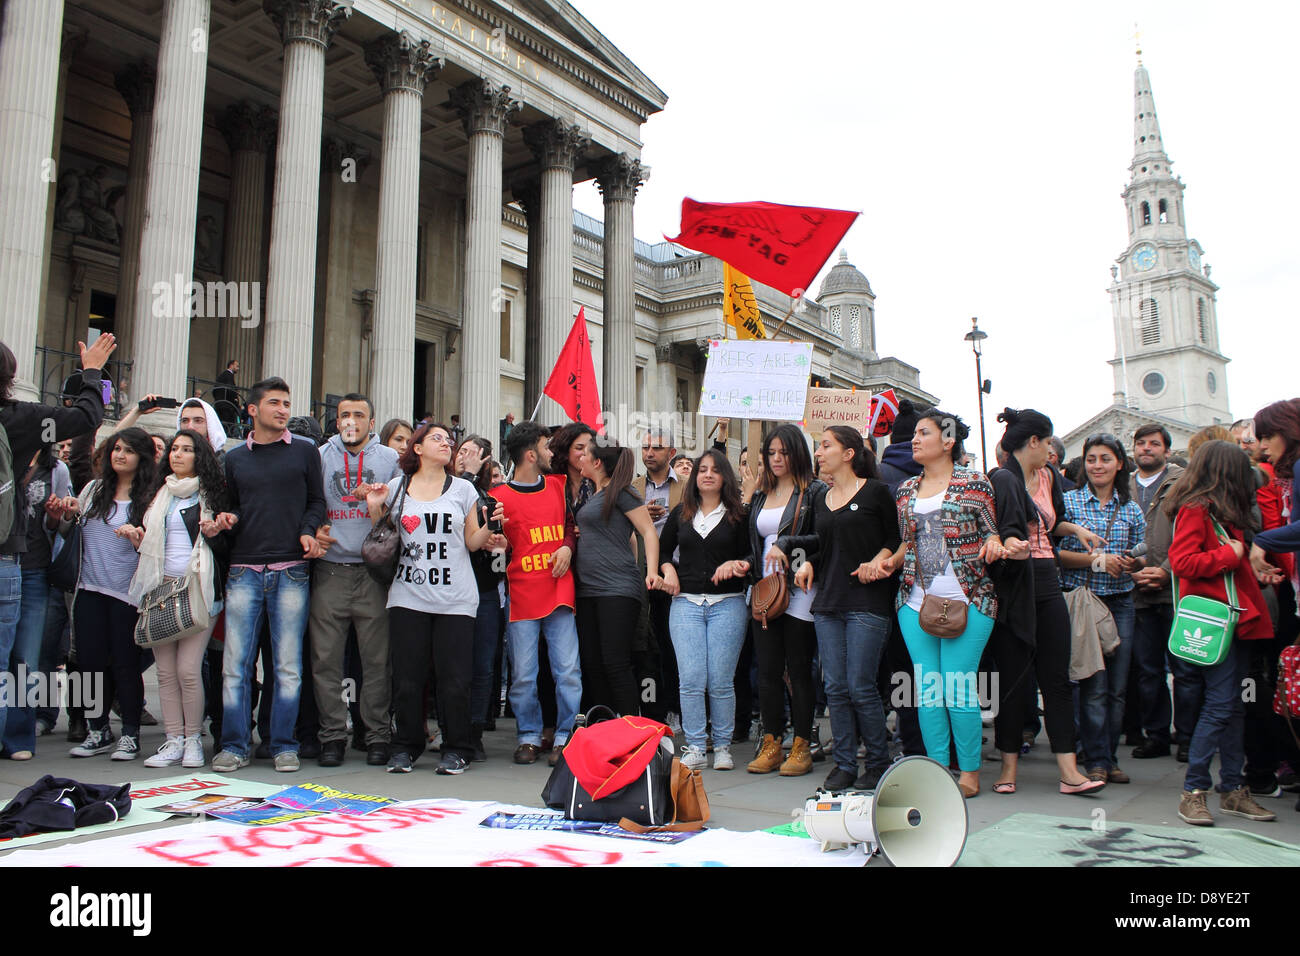 Turkish Protesters Gathered In London To Show Their Support To Gezi